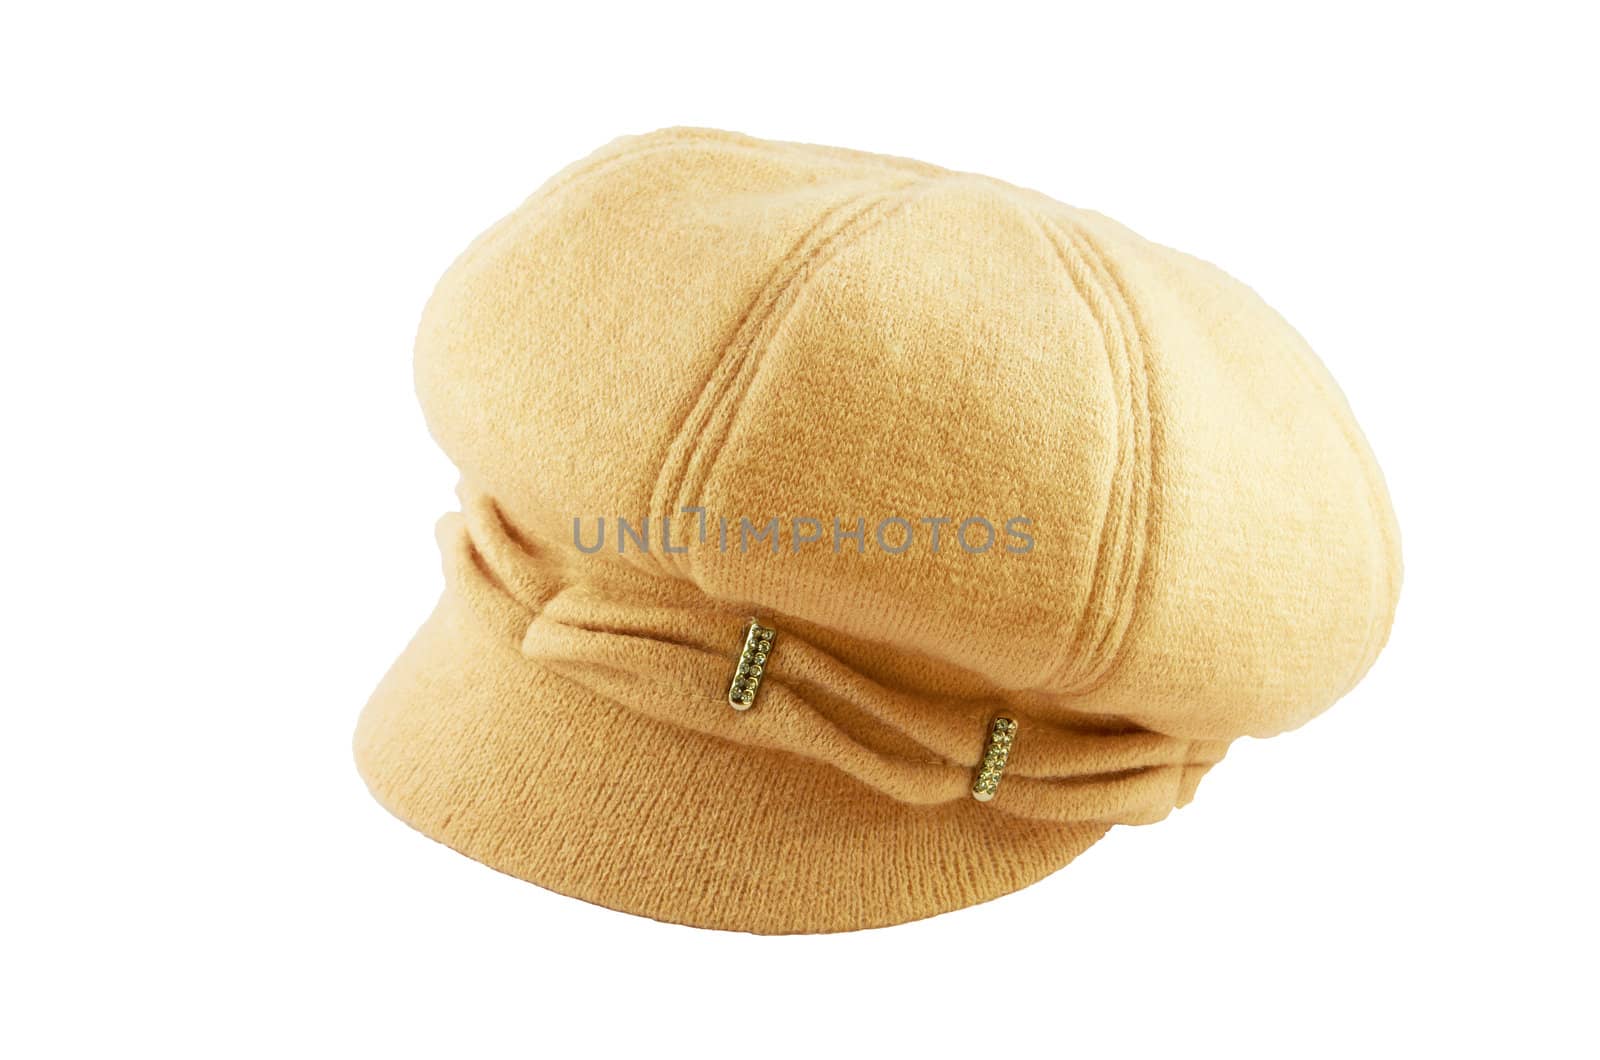 New women's hat light coffee color on a white background